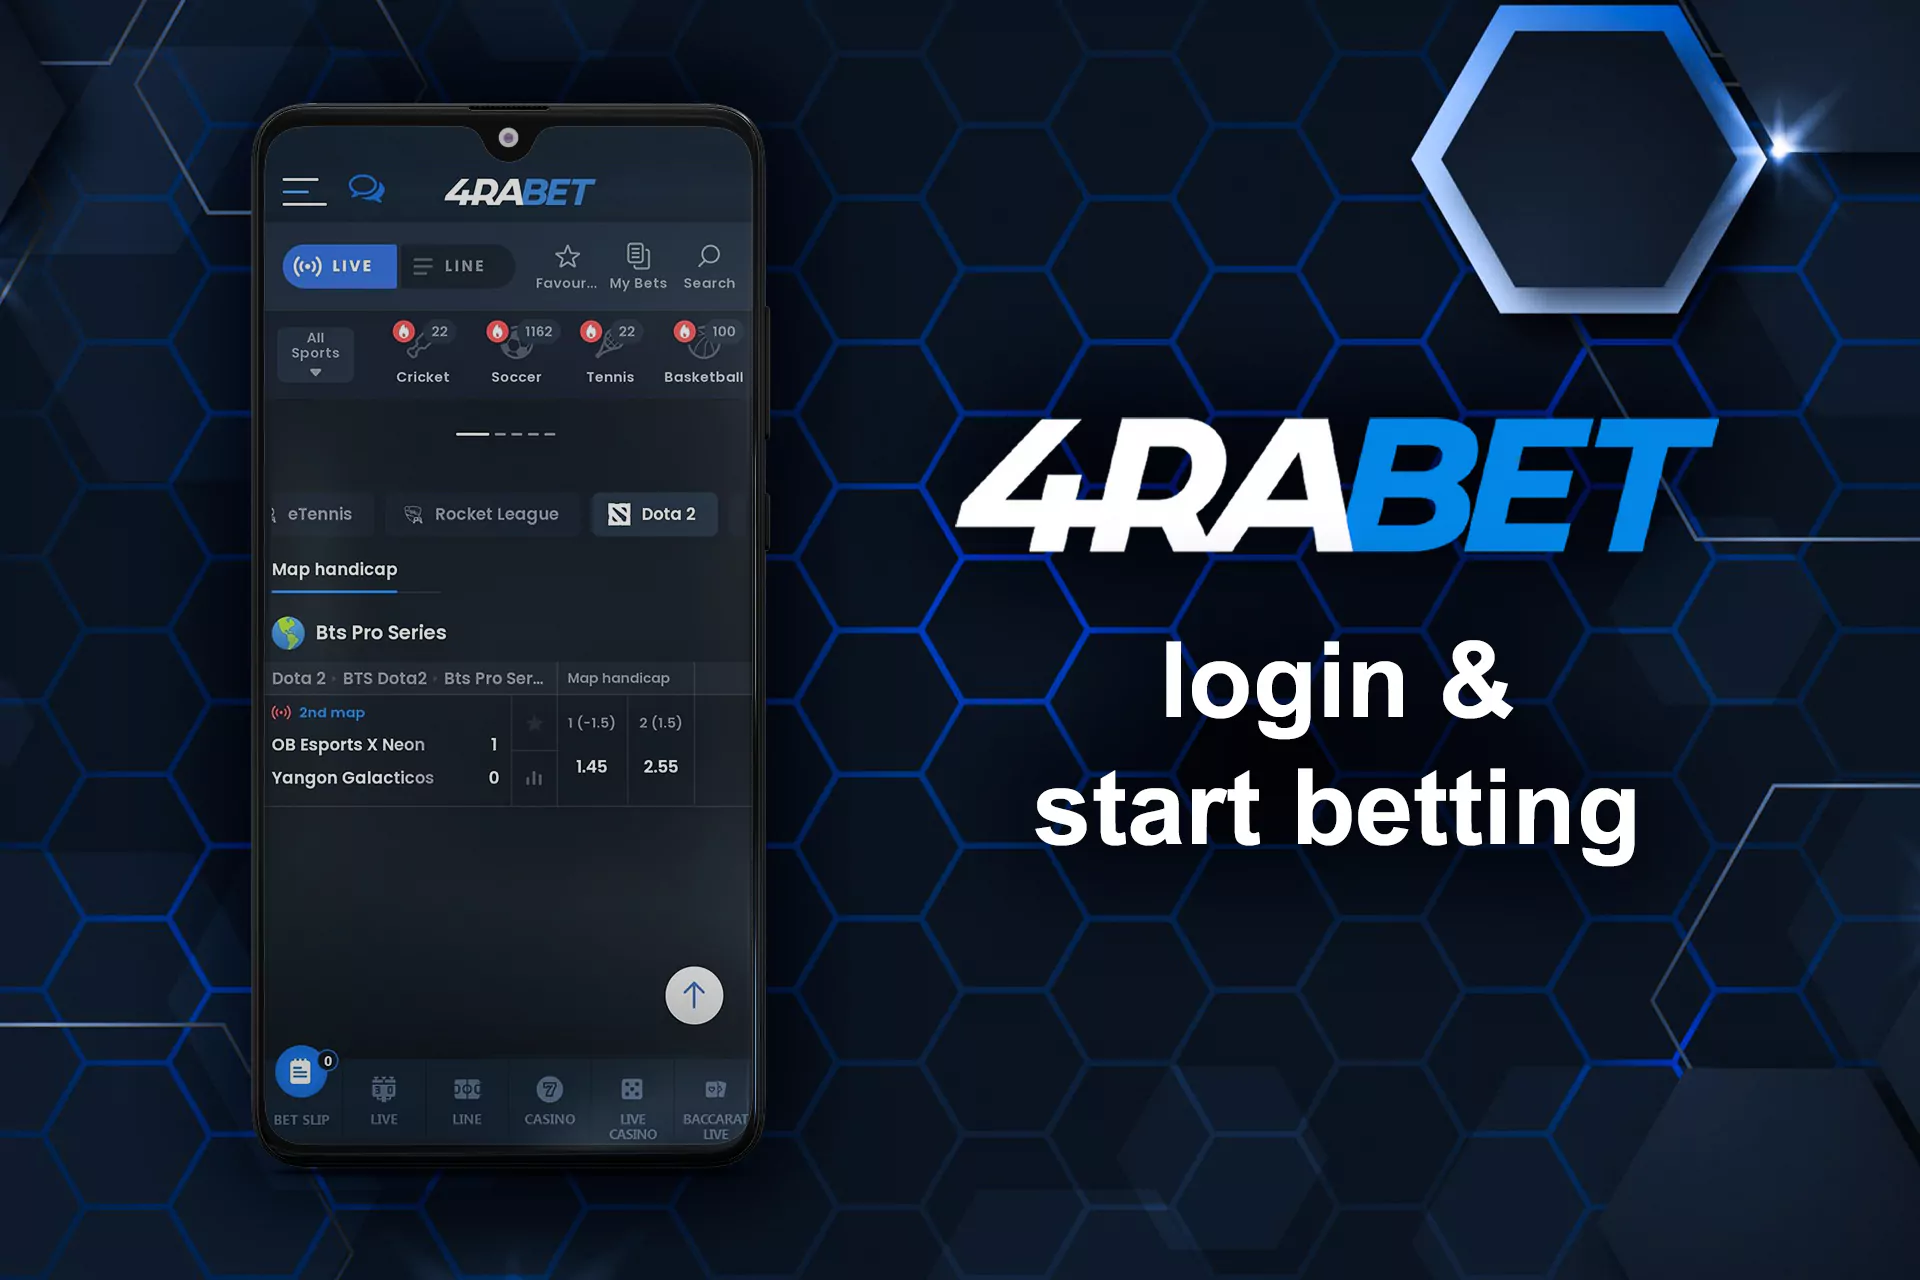 Log in to the app and start betting on Dota 2 events.